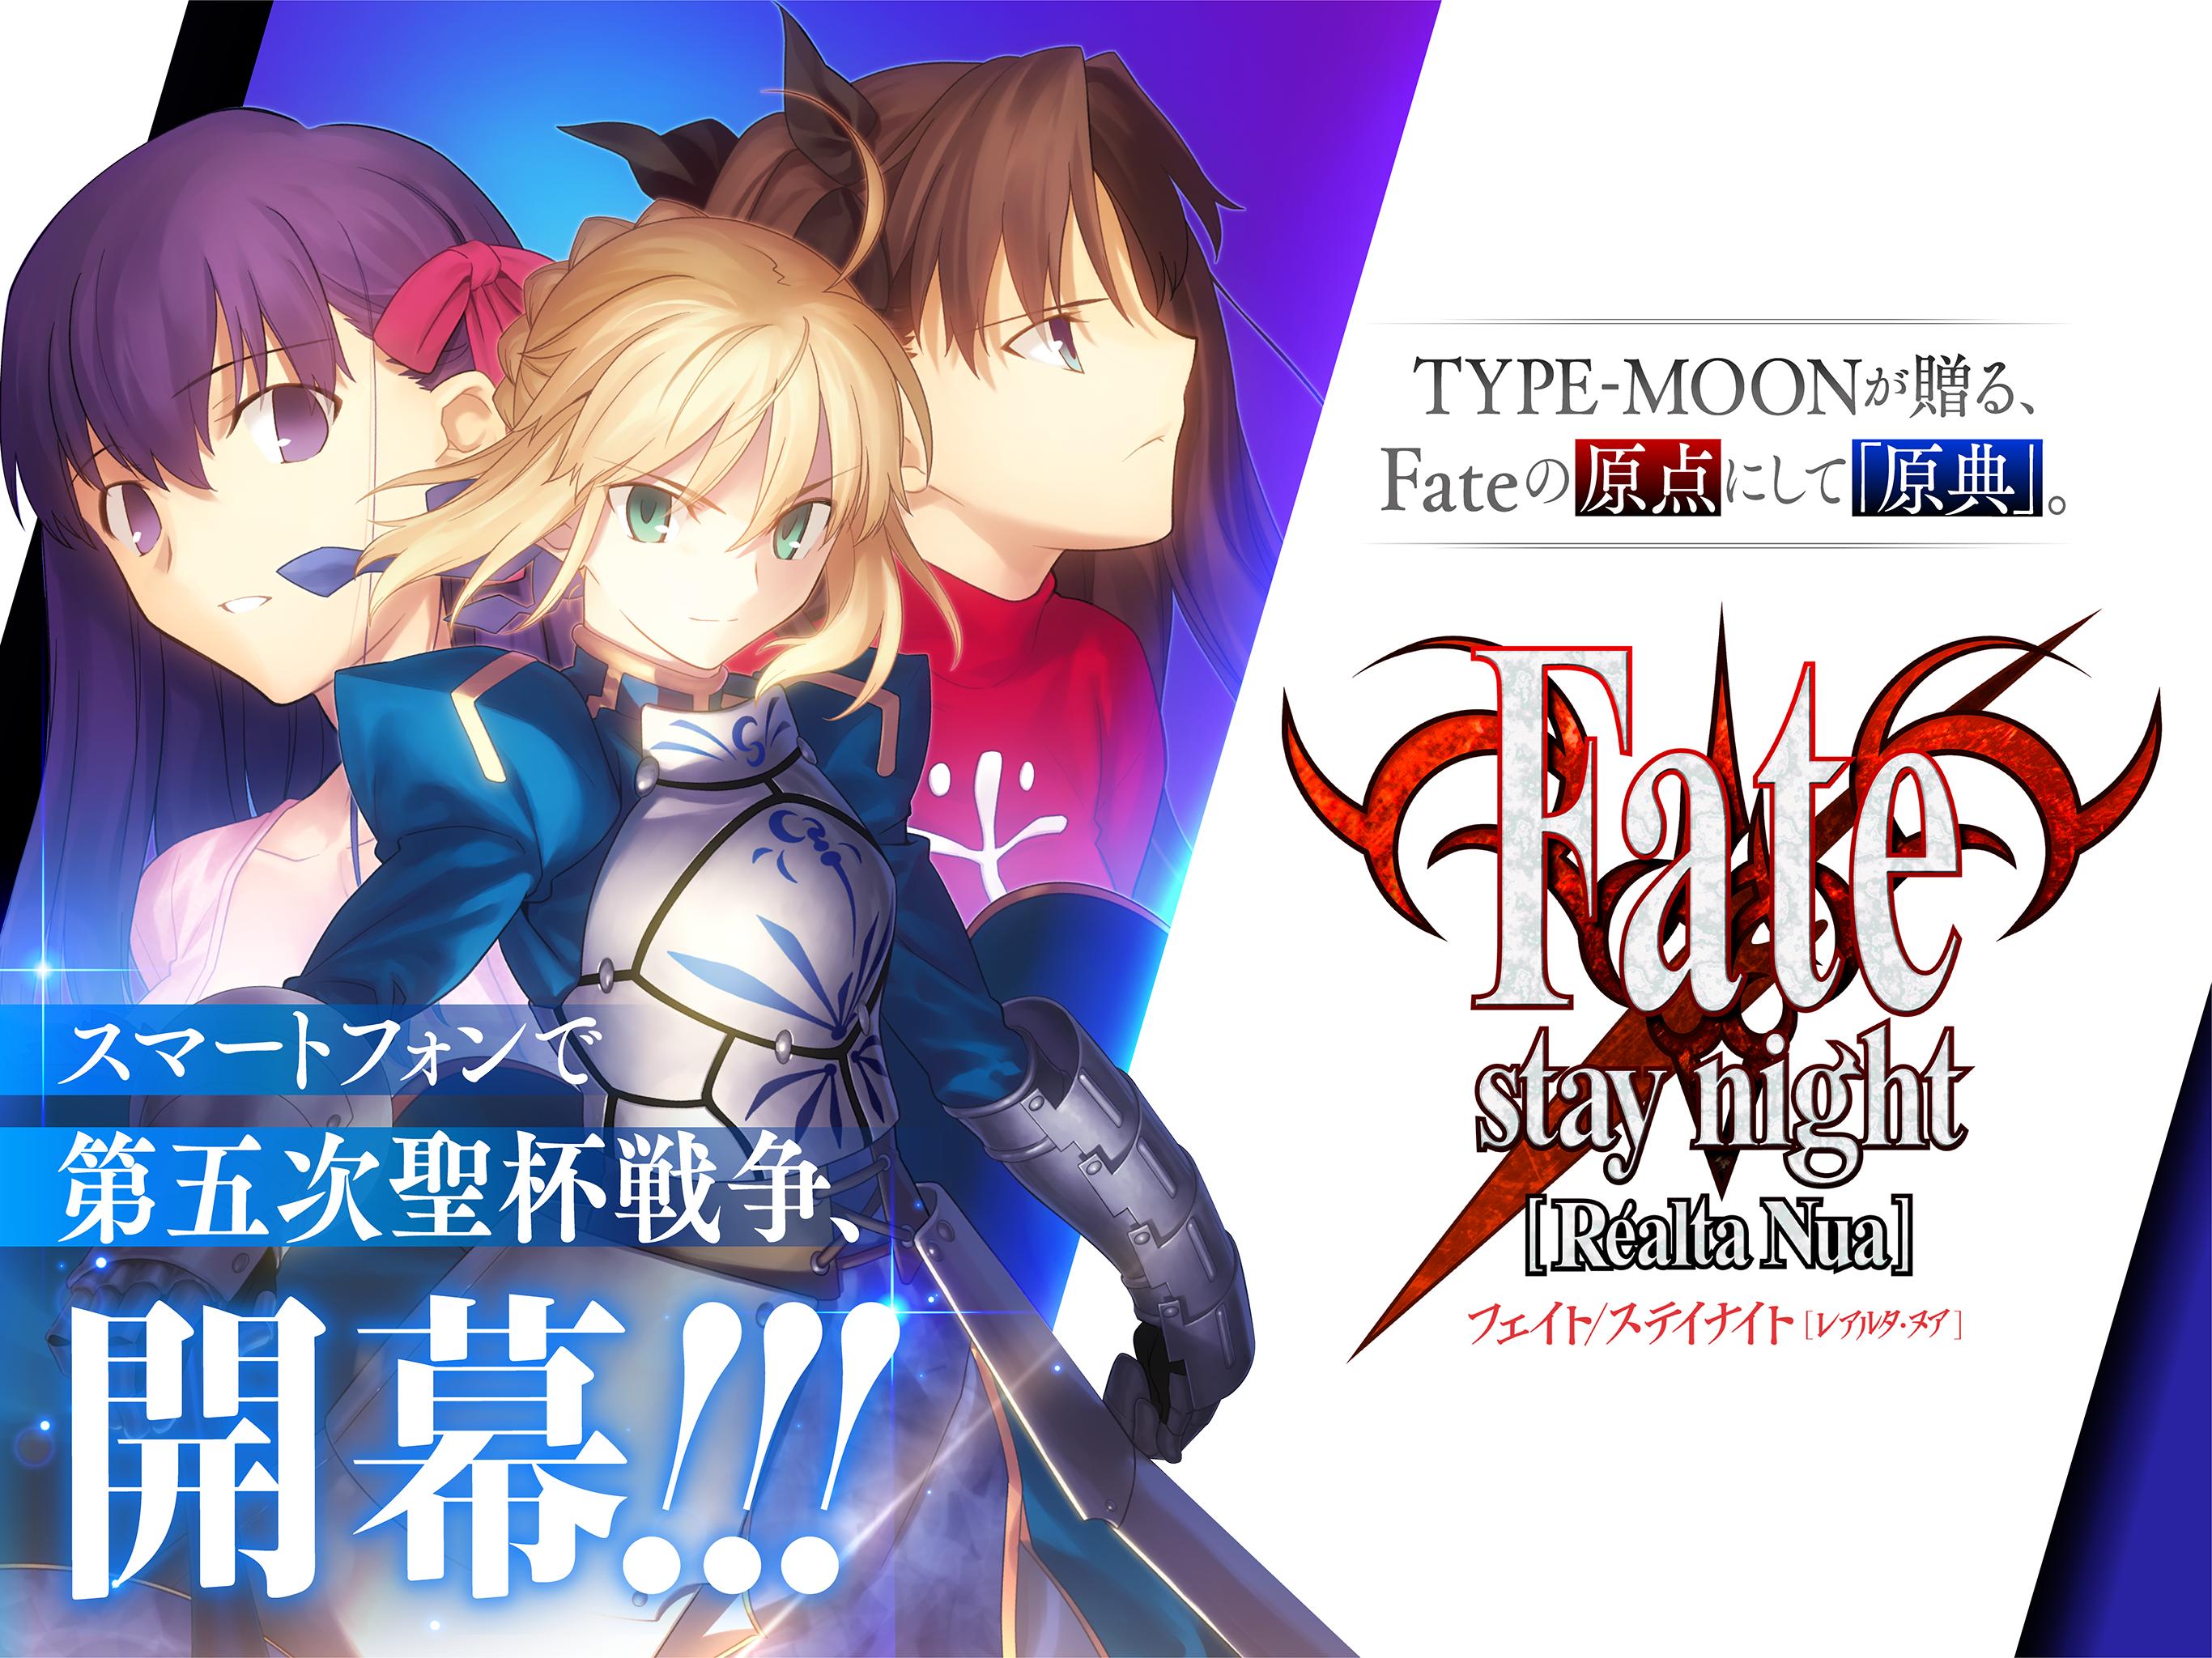 Fate Stay Night Realta Nua For Android Apk Download - fate roblox game